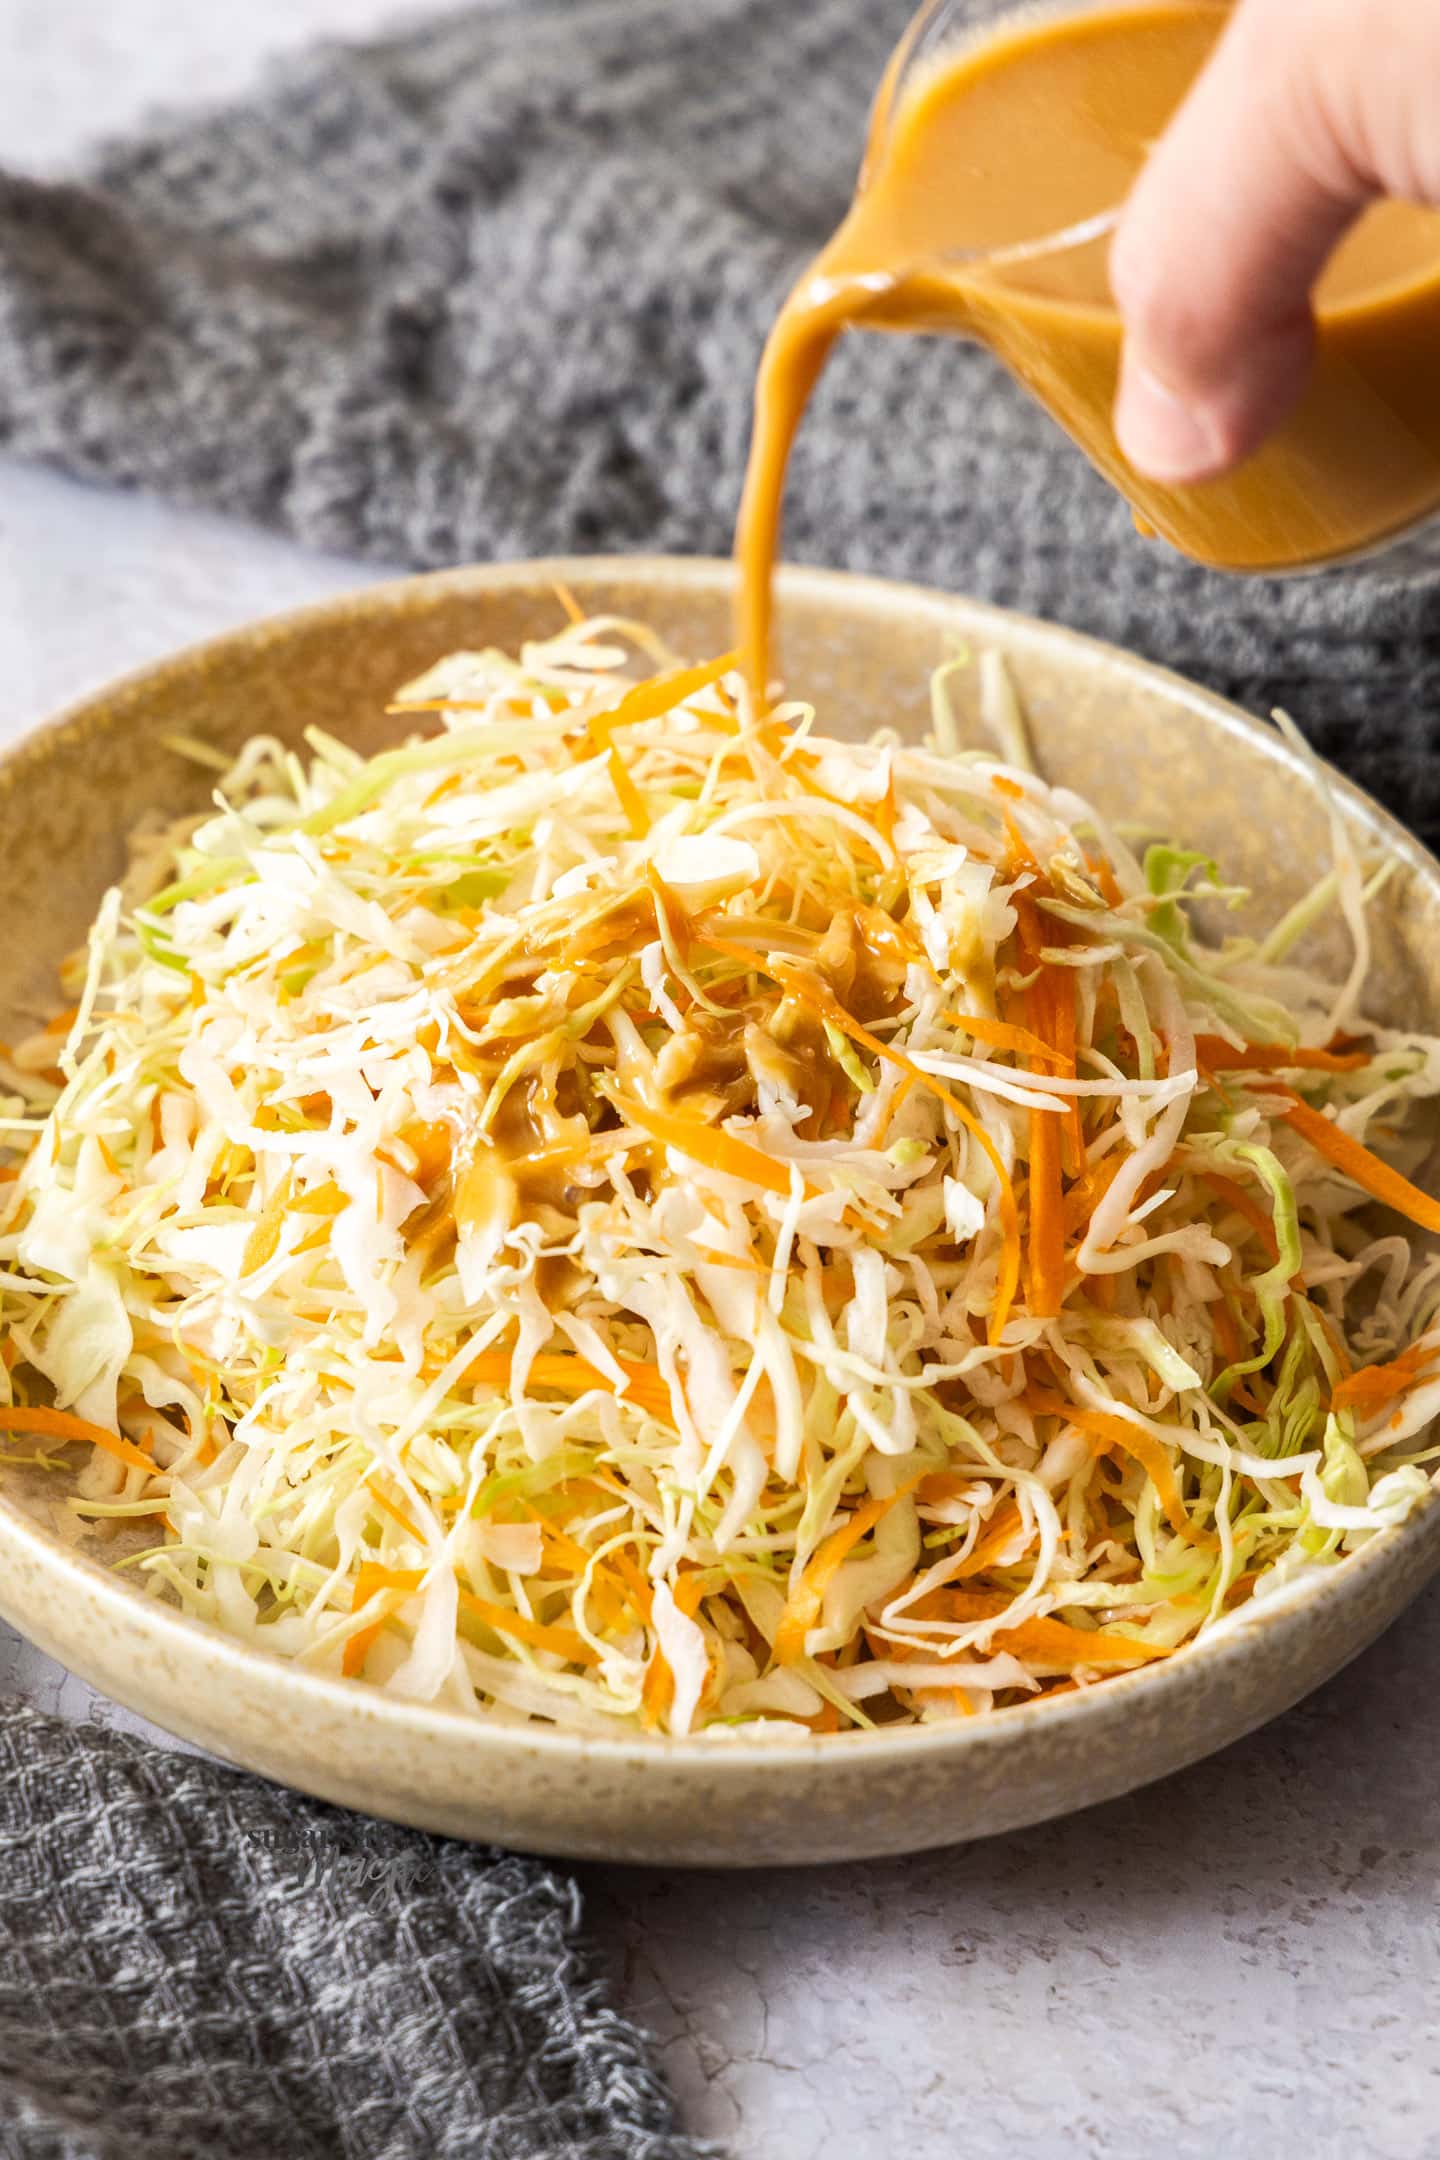 Japanese sesame dressing being poured over shredded cabbage and carrot.